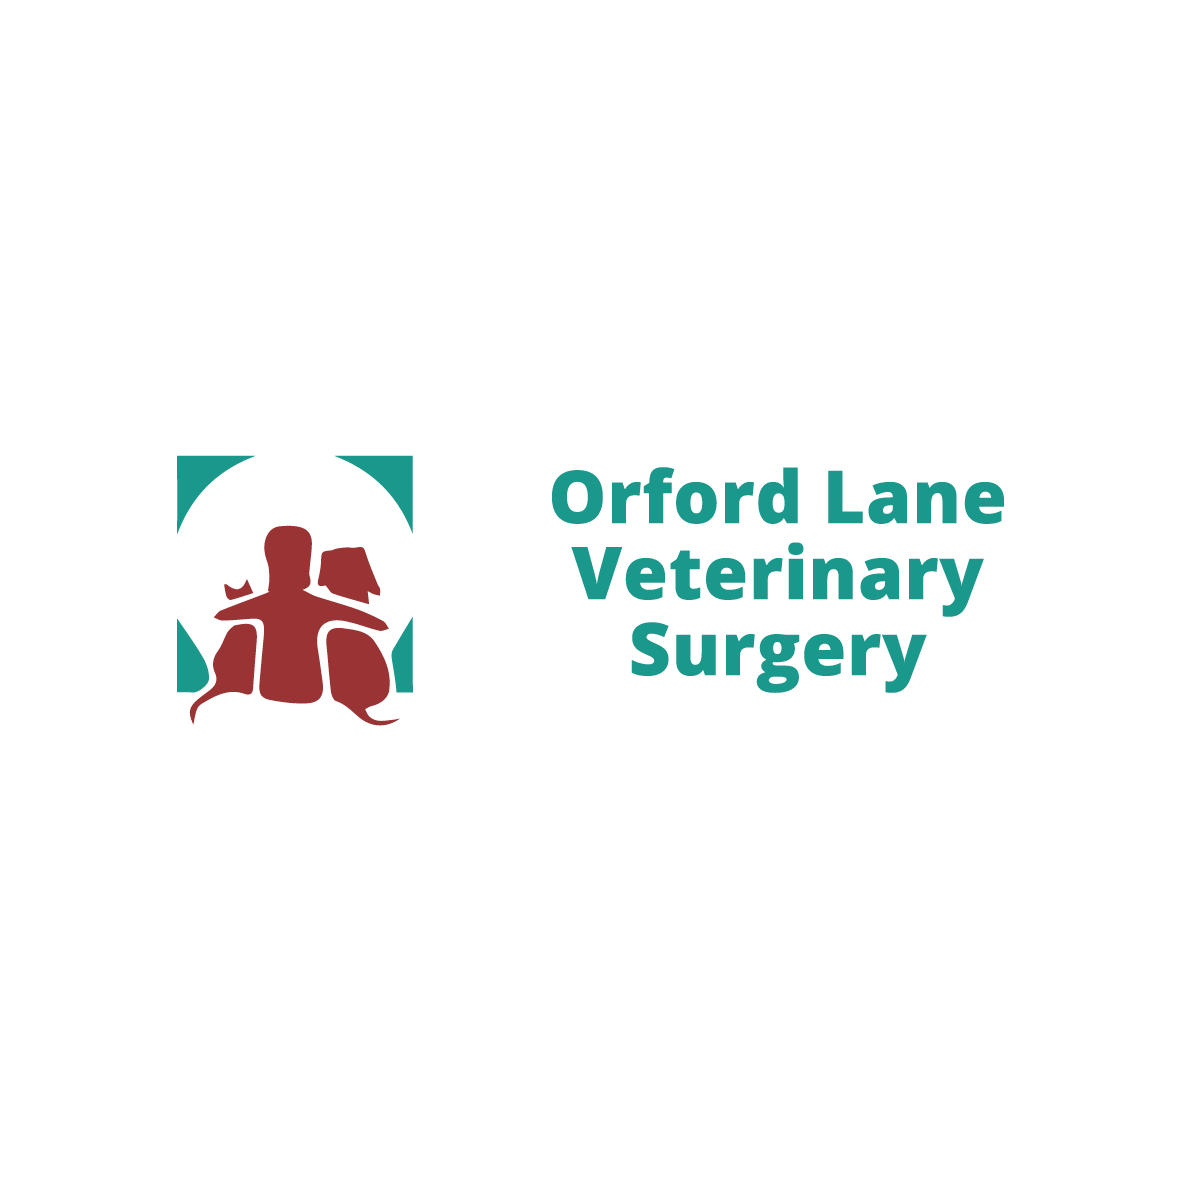 Willows Veterinary Group - Orford Lane Veterinary Surgery Logo